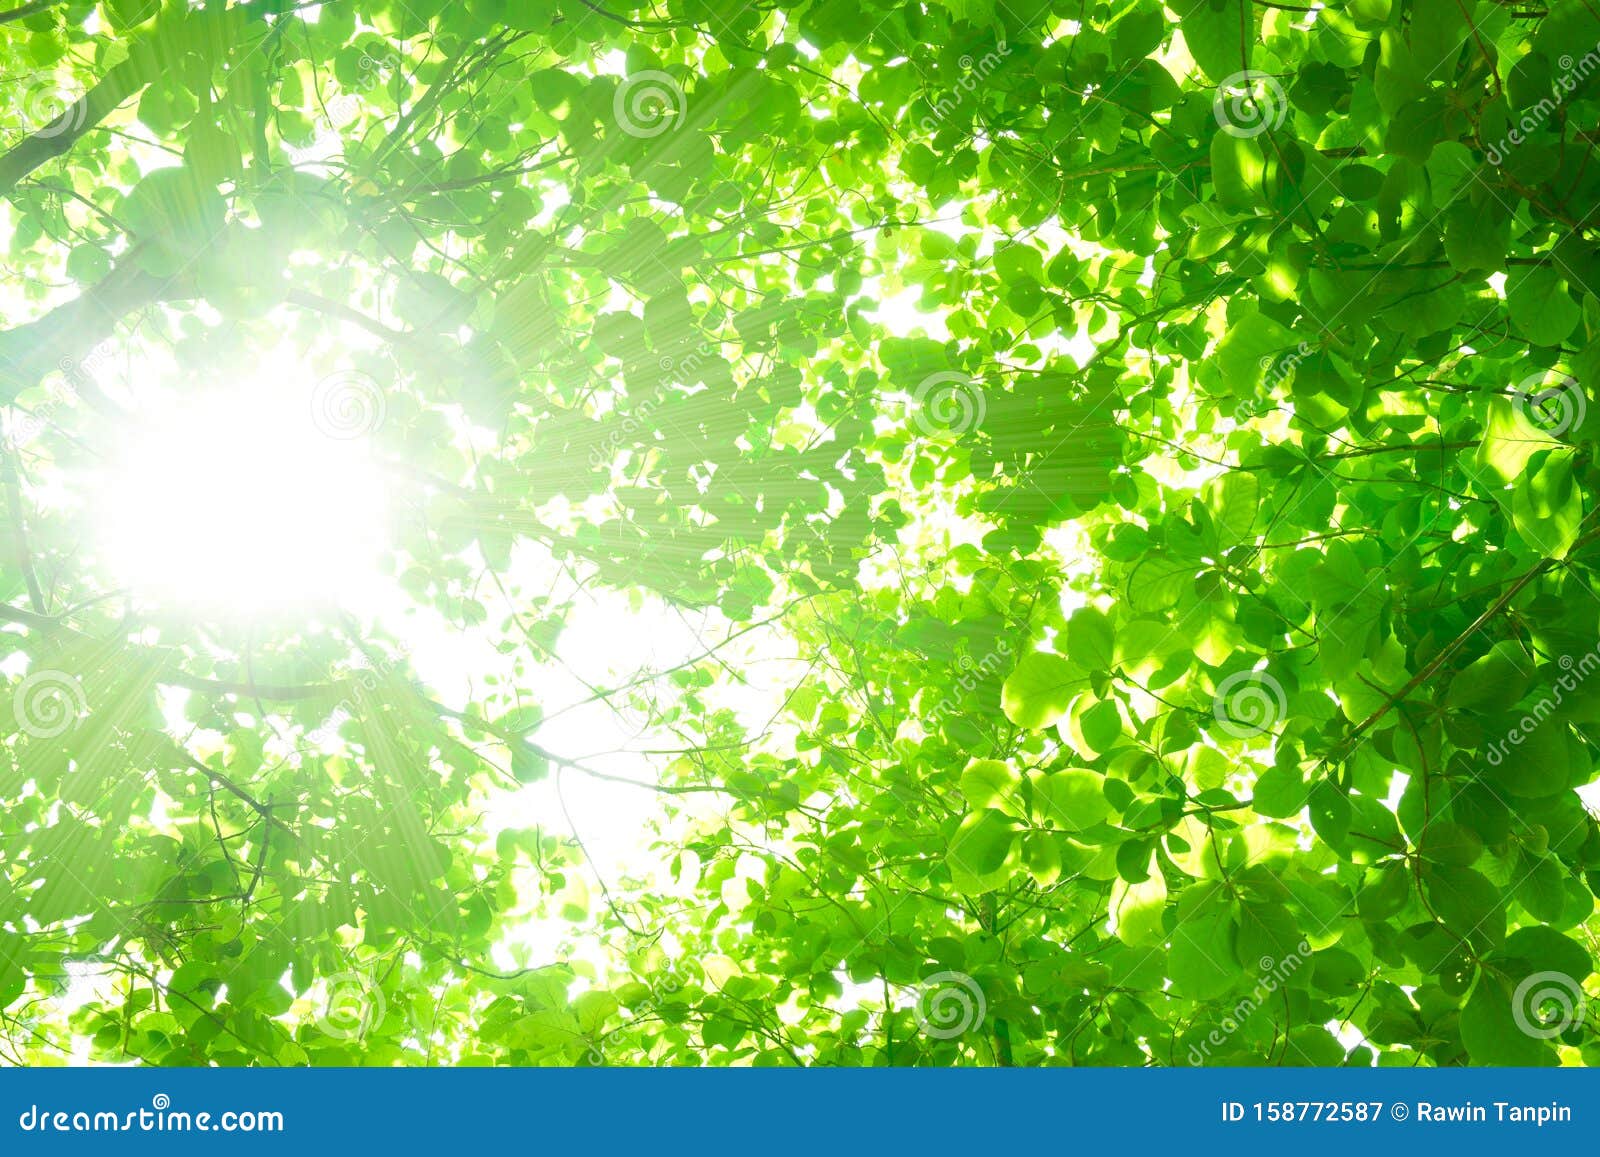 Sunlight through the Fresh Green Leaves,Bright Green Leaves Background